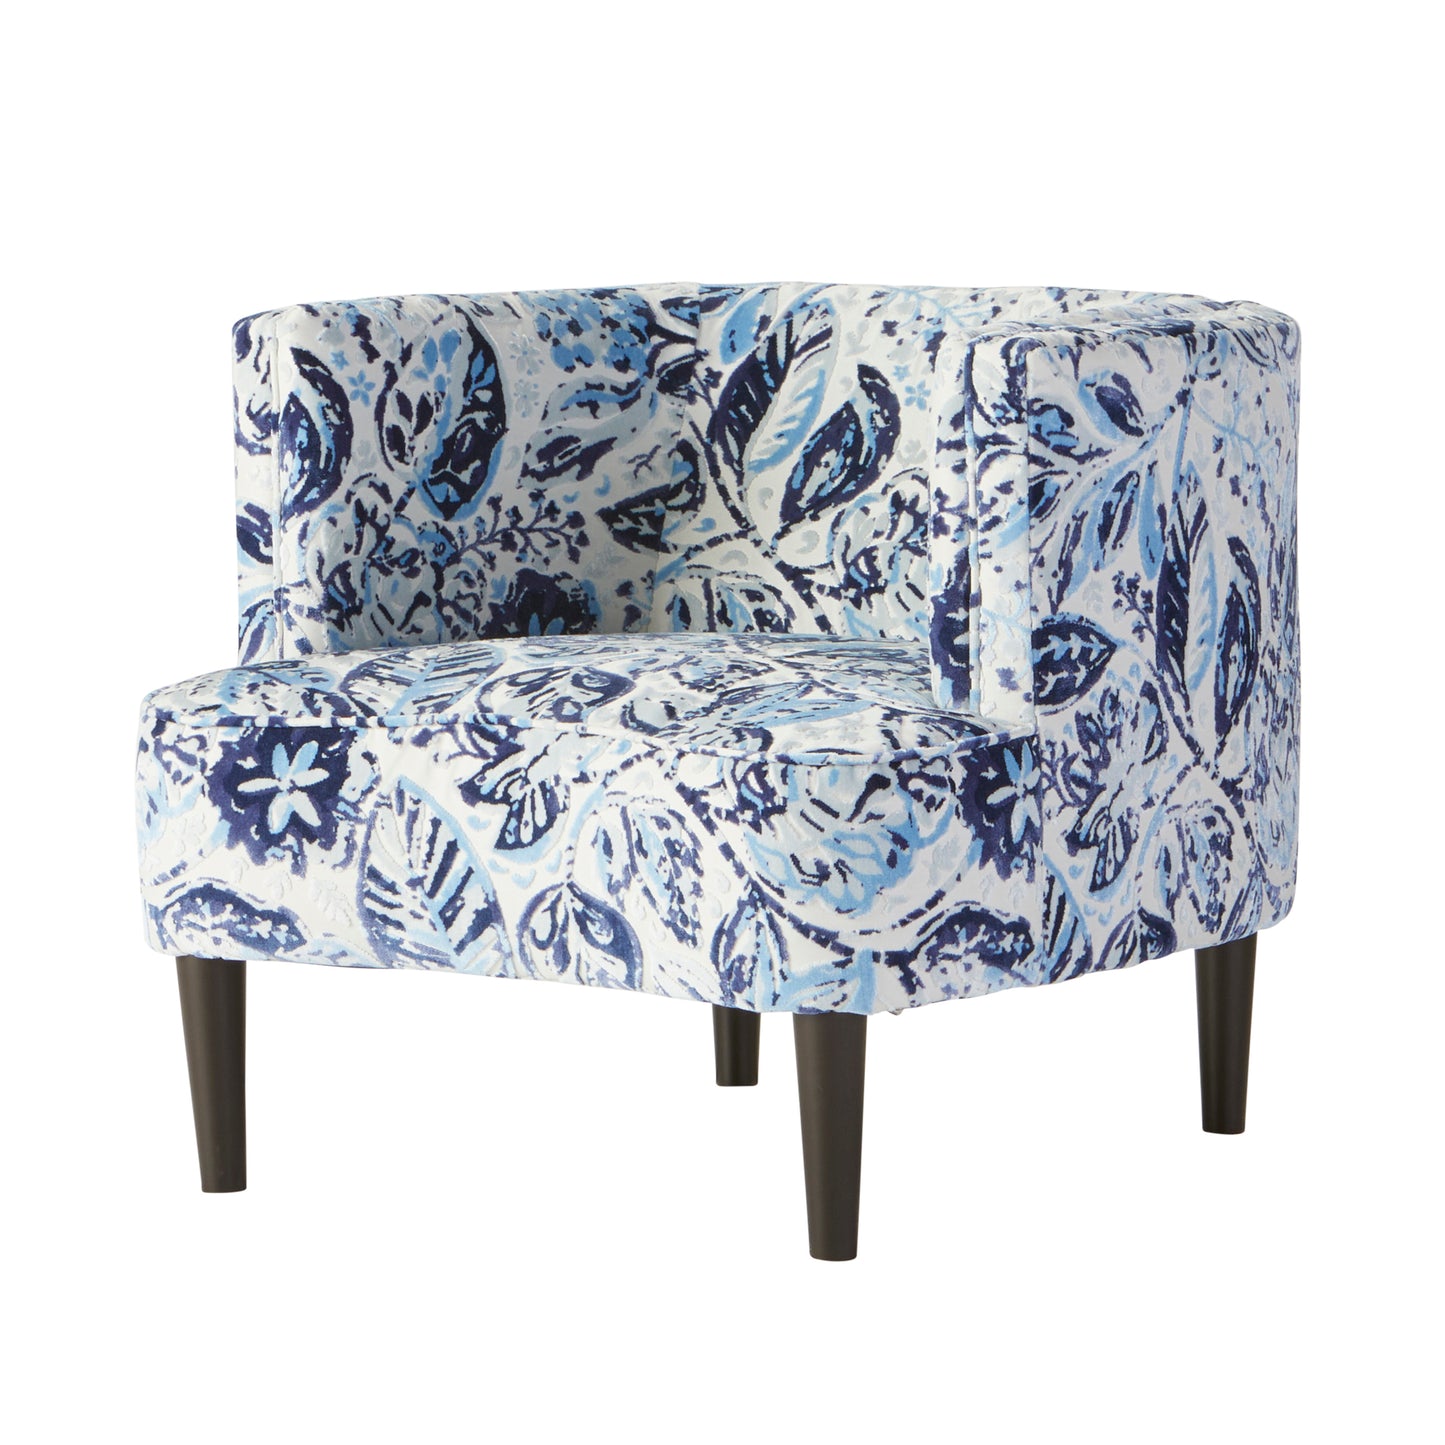 Roundhill Furniture Isla Chenille Oversized Living Room Barrel Accent Chair with Arms, Lyanna Indigo